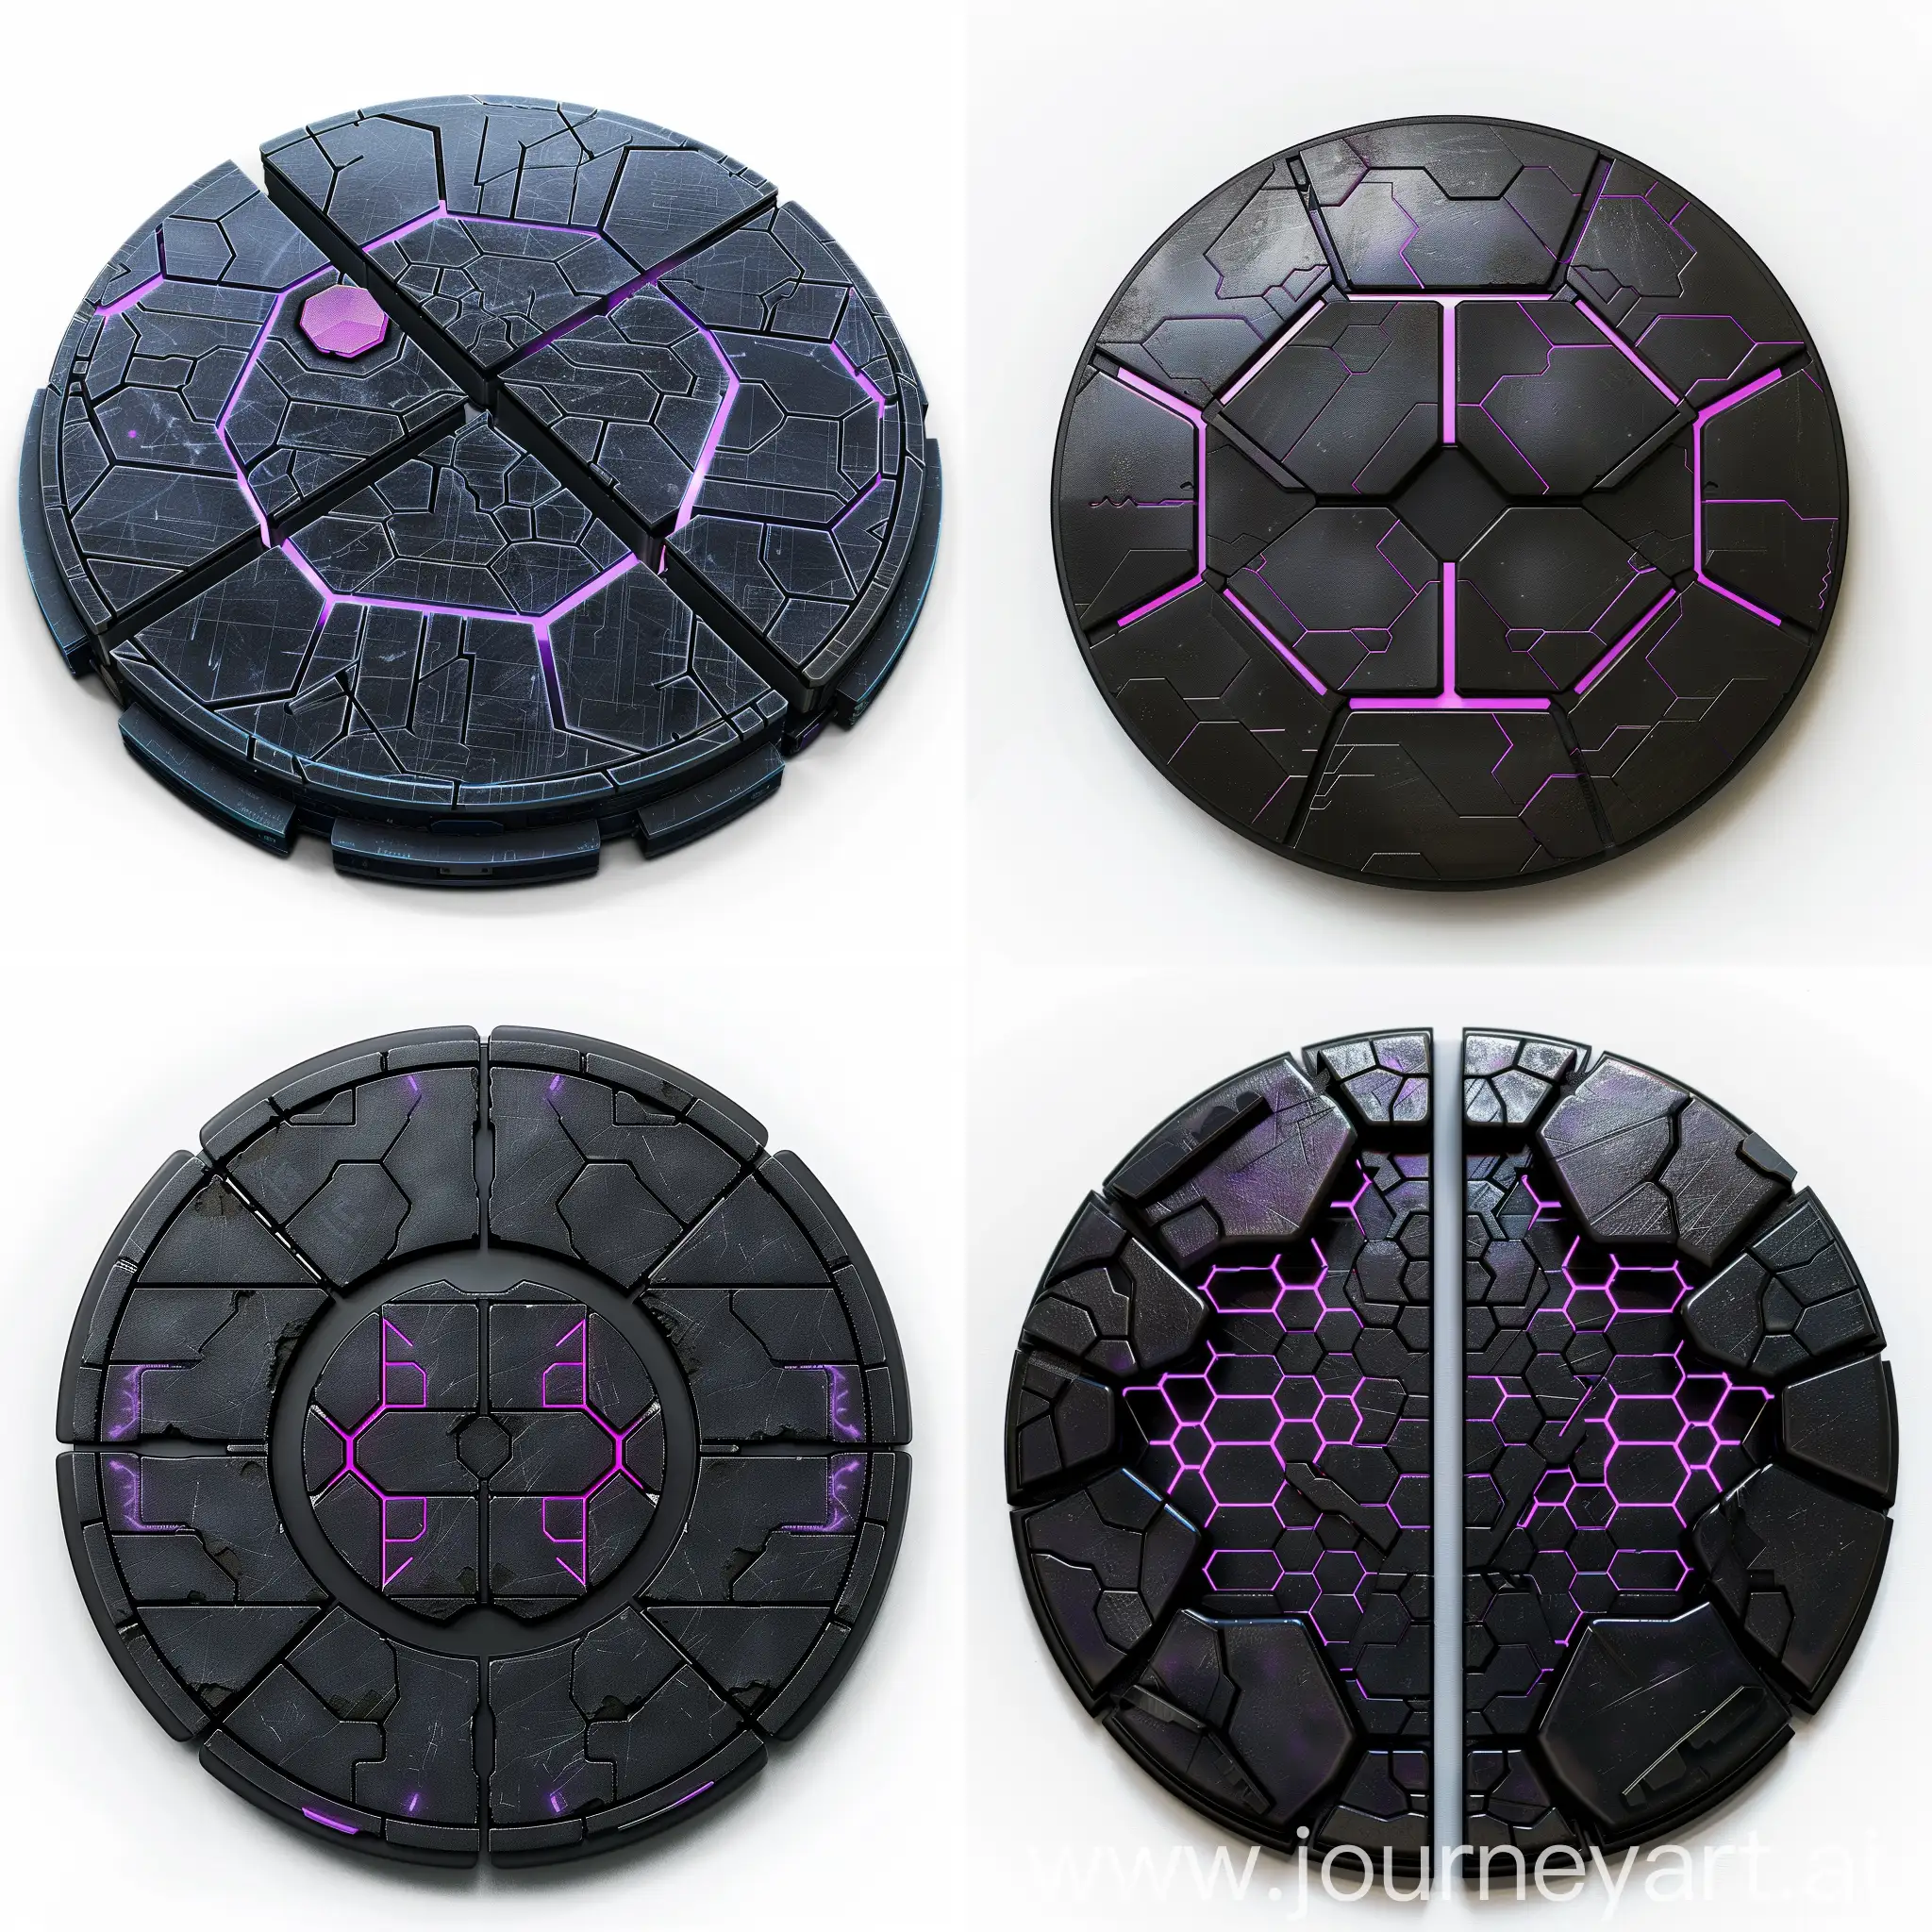 Front view of a very sleek cyberpunk robotic coin in shade of black. Its some places have neon purple hexagon patterns on it.  made of 4 separate pieces, space between pieces, clean white background. Photo realistic --v 6.0